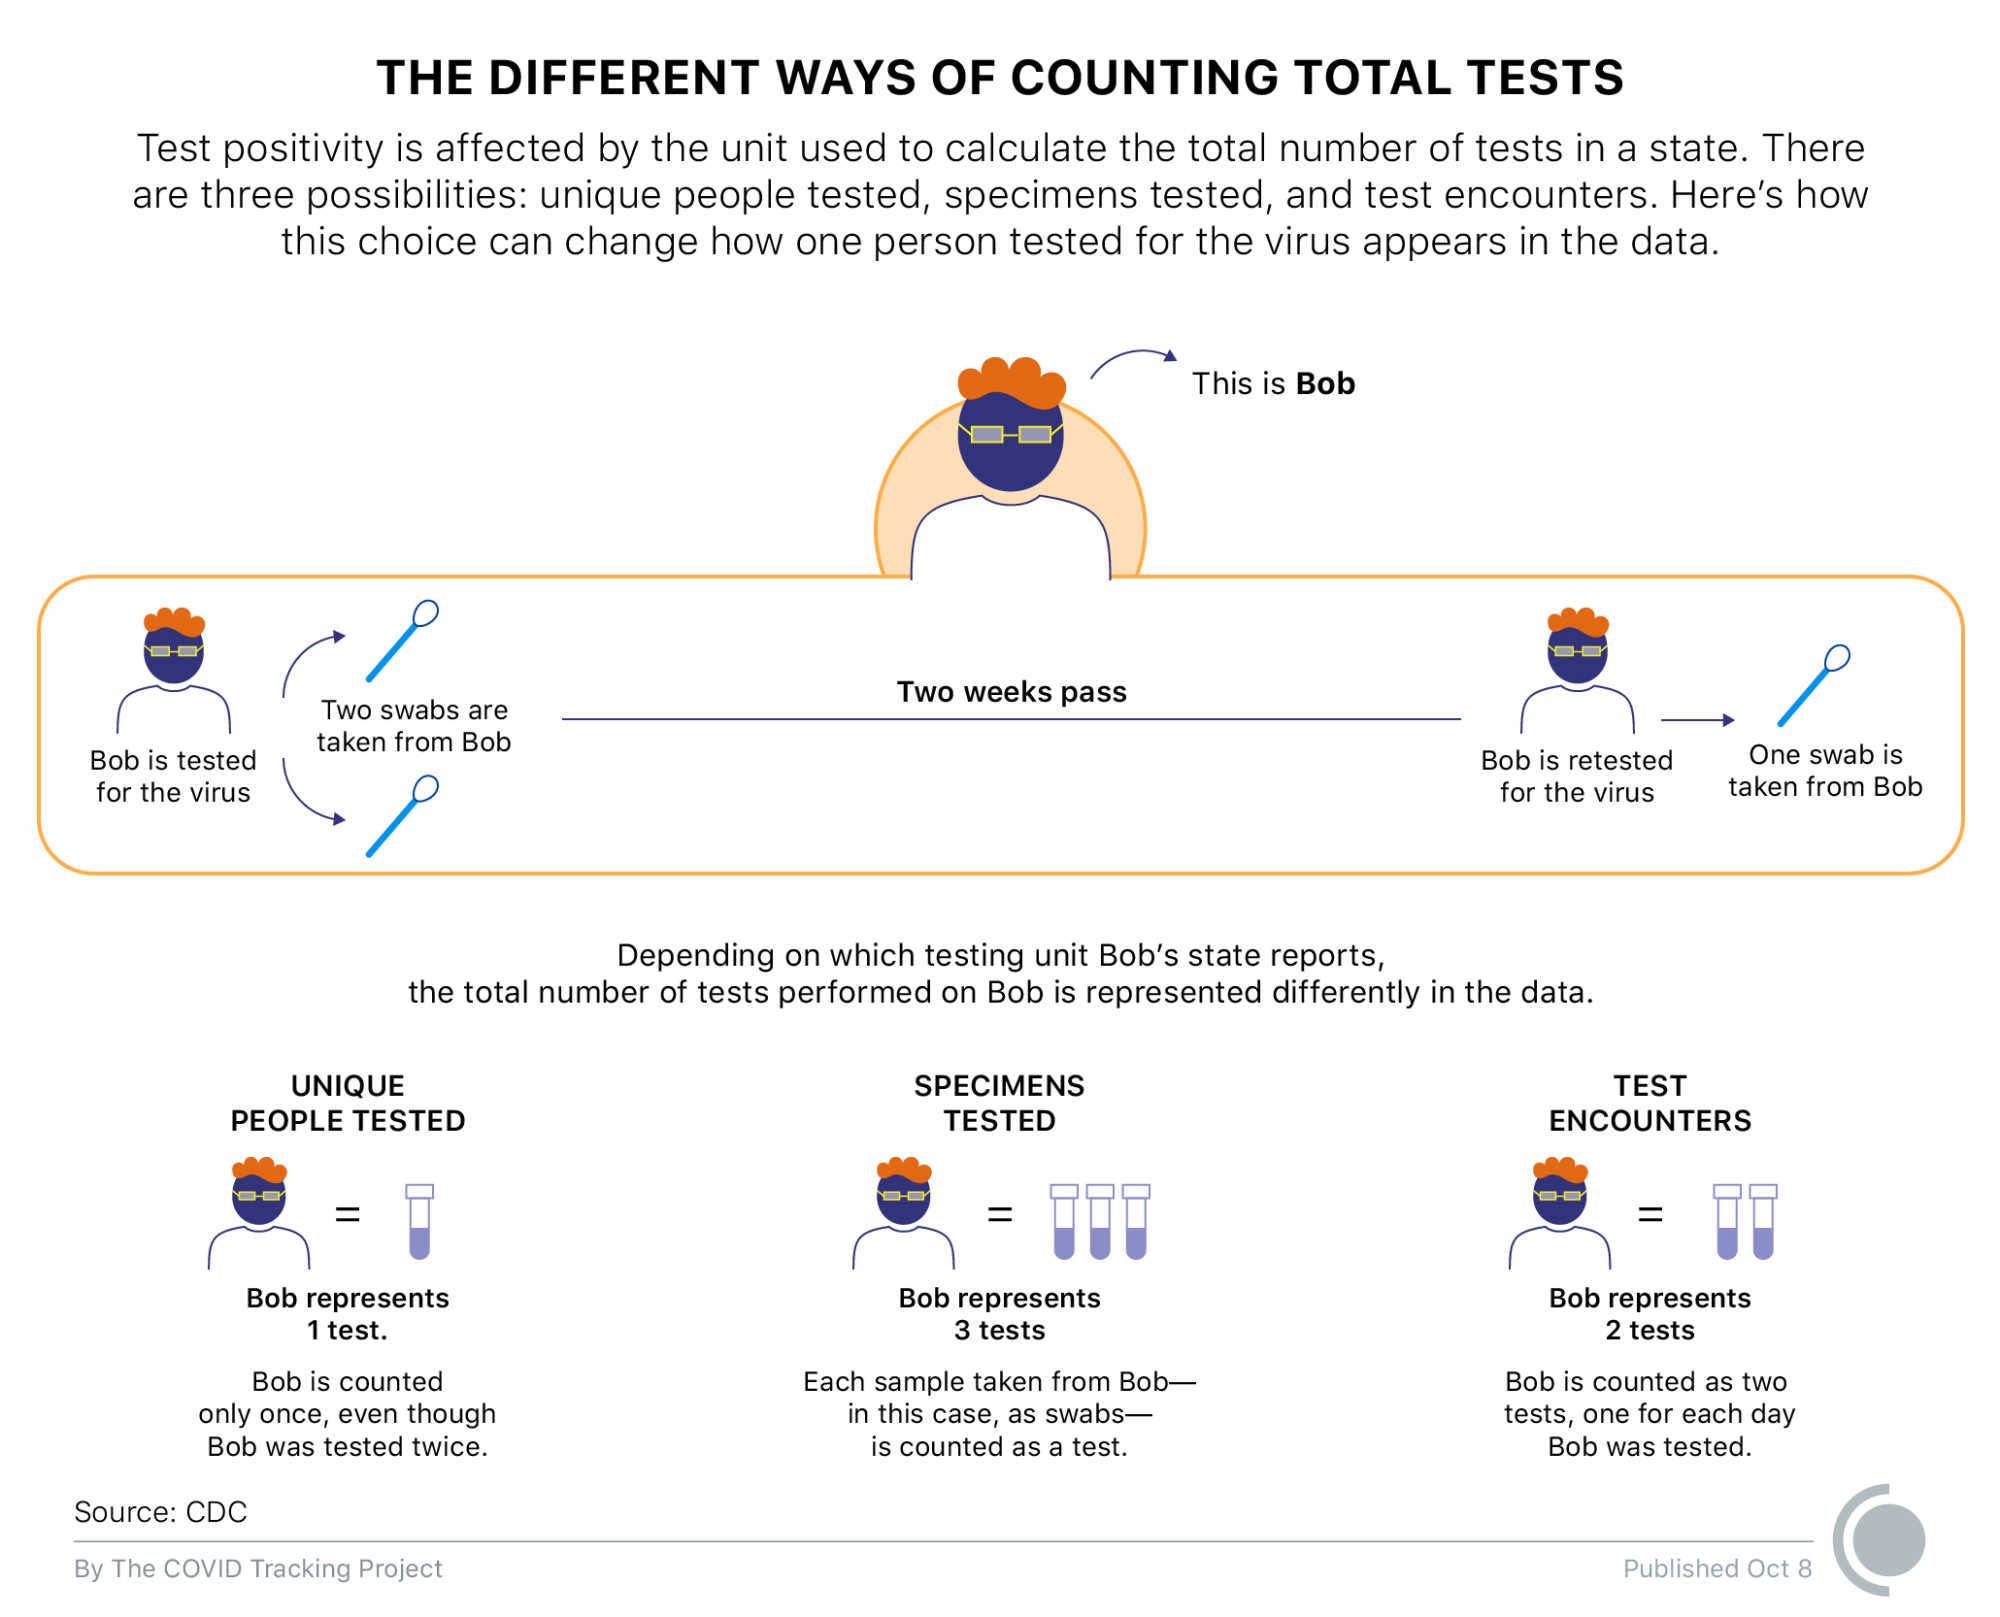 Graphic depicting the three different ways states are counting total tests. A single person's test journey usually involves three test swabs, two swabs initially and then a third swab to follow-up after two weeks. For this single person's test journey, a state may report this as 1 test (for unique people tested), 3 tests (for specimens tested), or 2 tests (for number of test encounters).